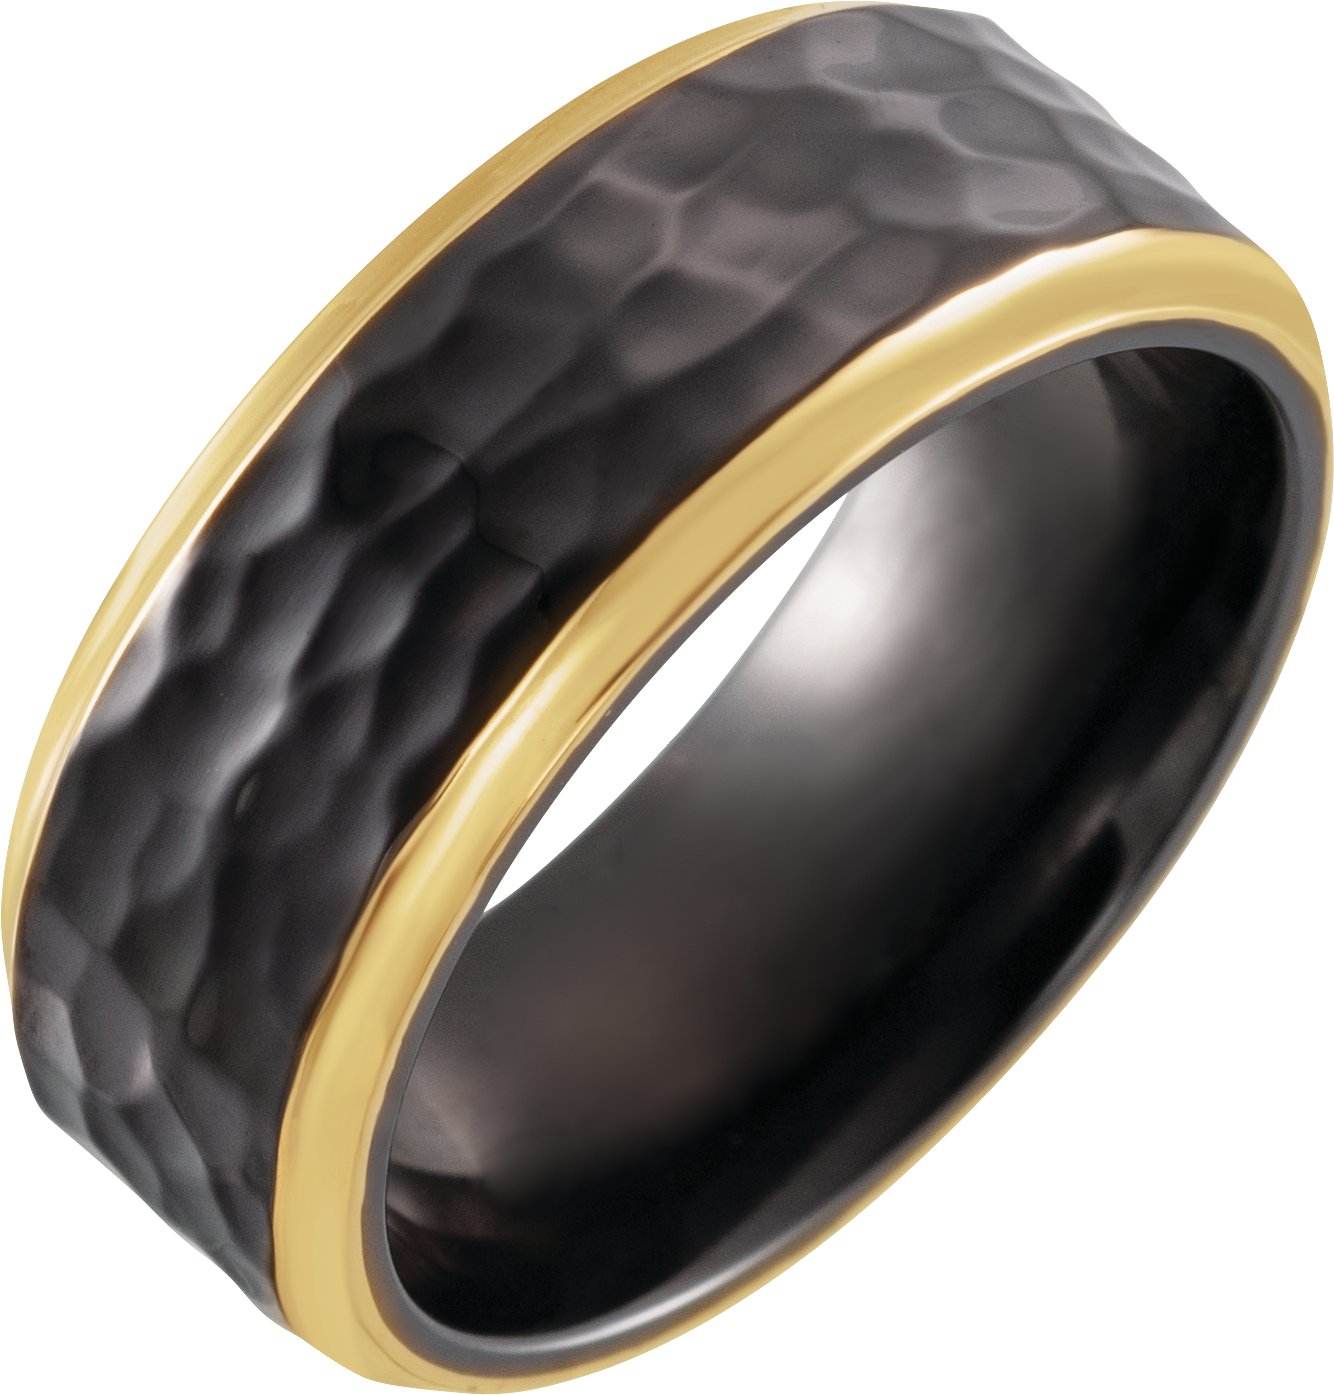 18K Yellow Gold PVD Black Titanium 8 mm Flat Size 10.5 Band with Hammer Finish